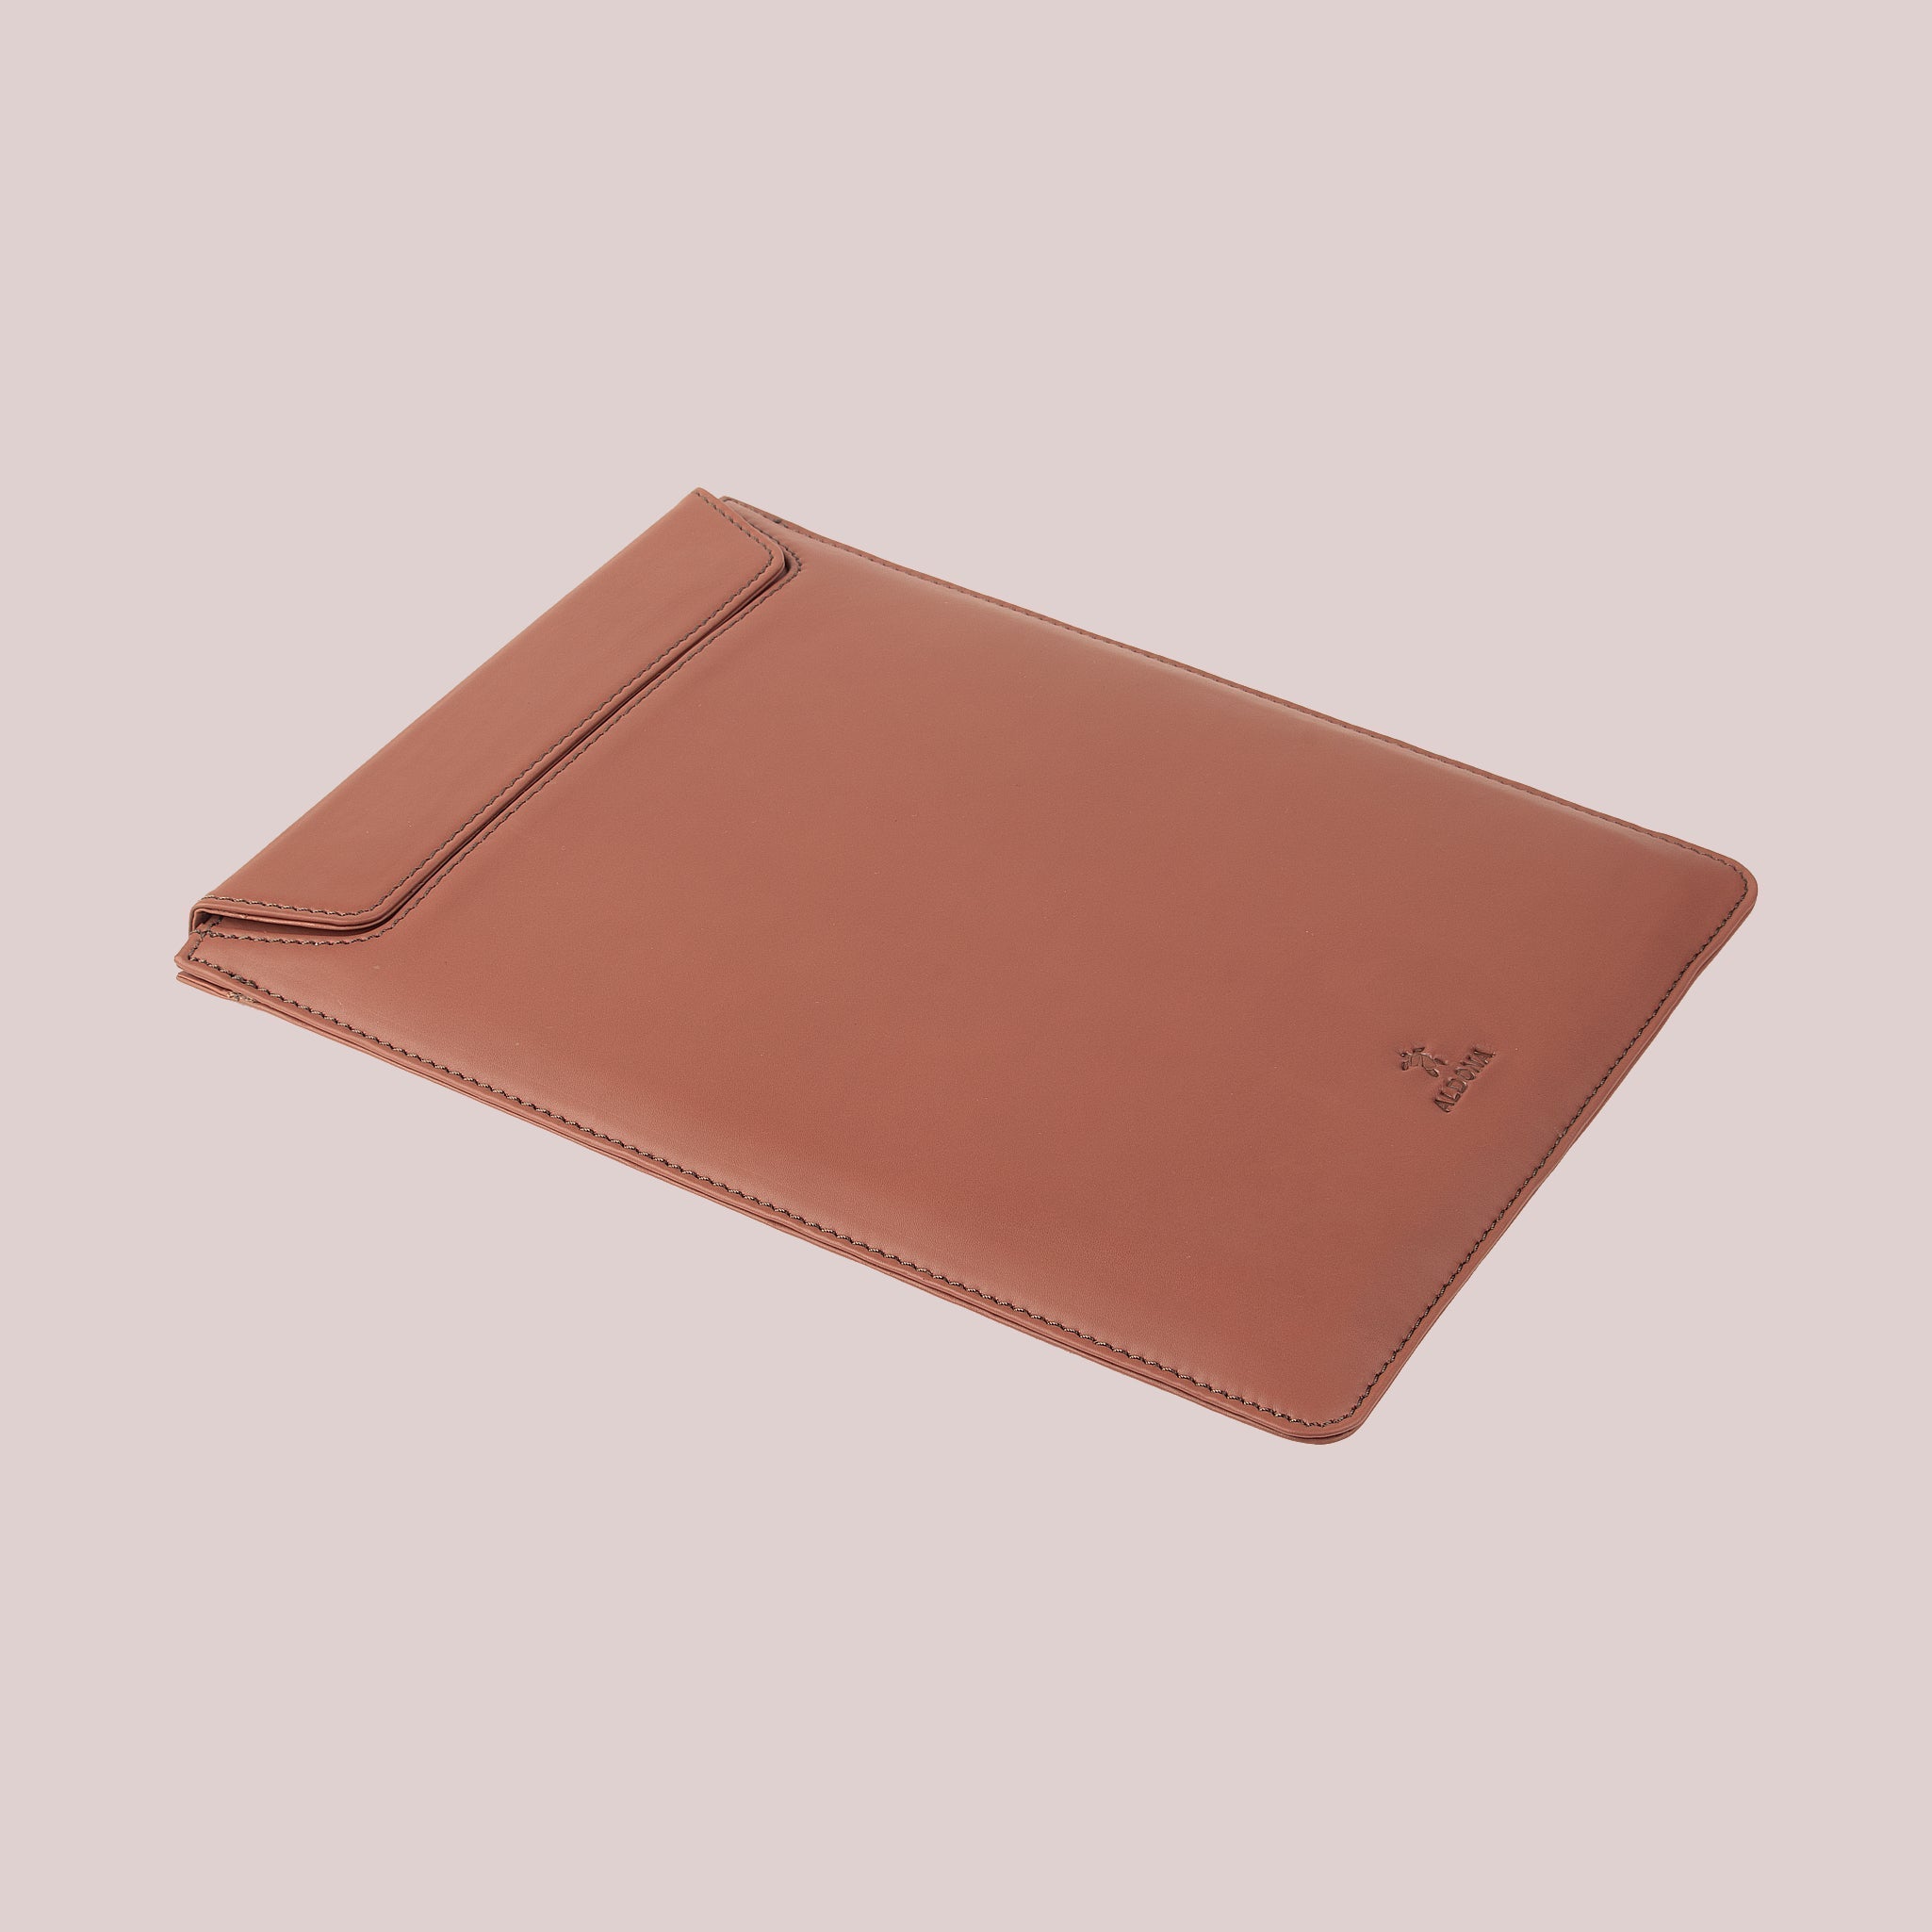 Buy Macbook leather case in brown color